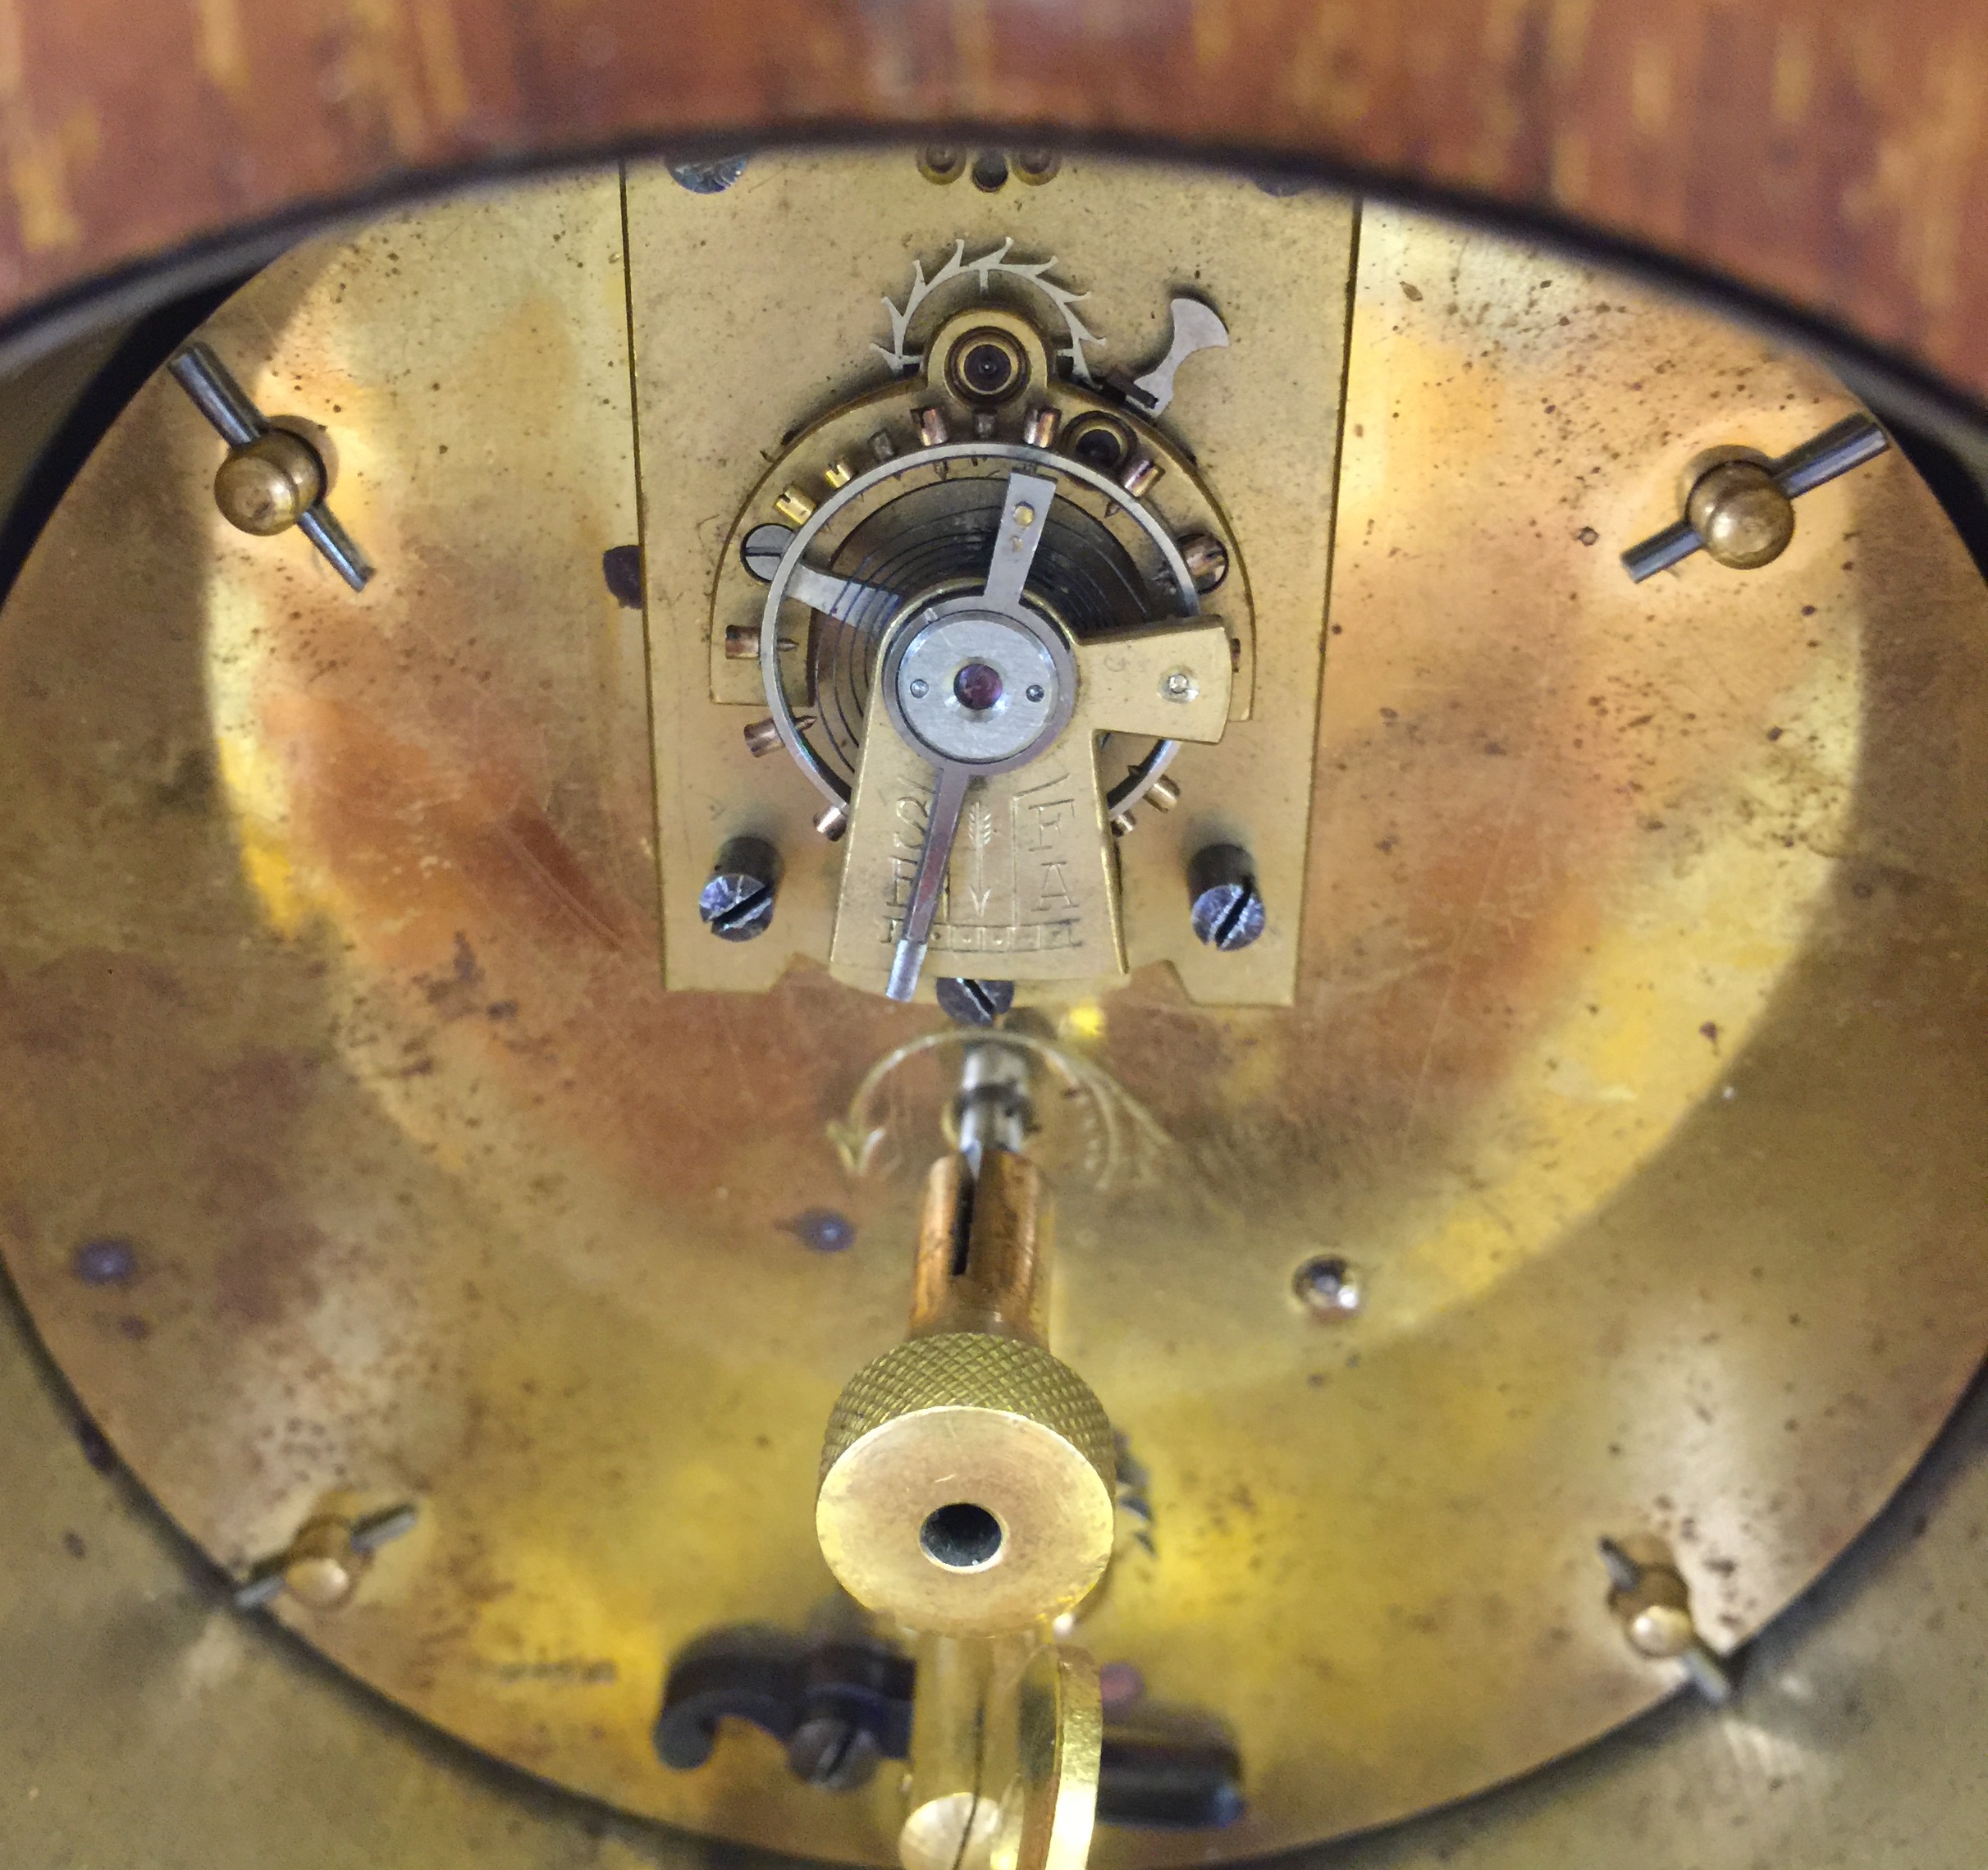 EDWARDIAN MANTLE CLOCK. A Brownlee & Son, Edinburgh inlaid mantle clock with French drum movement. - Image 6 of 7